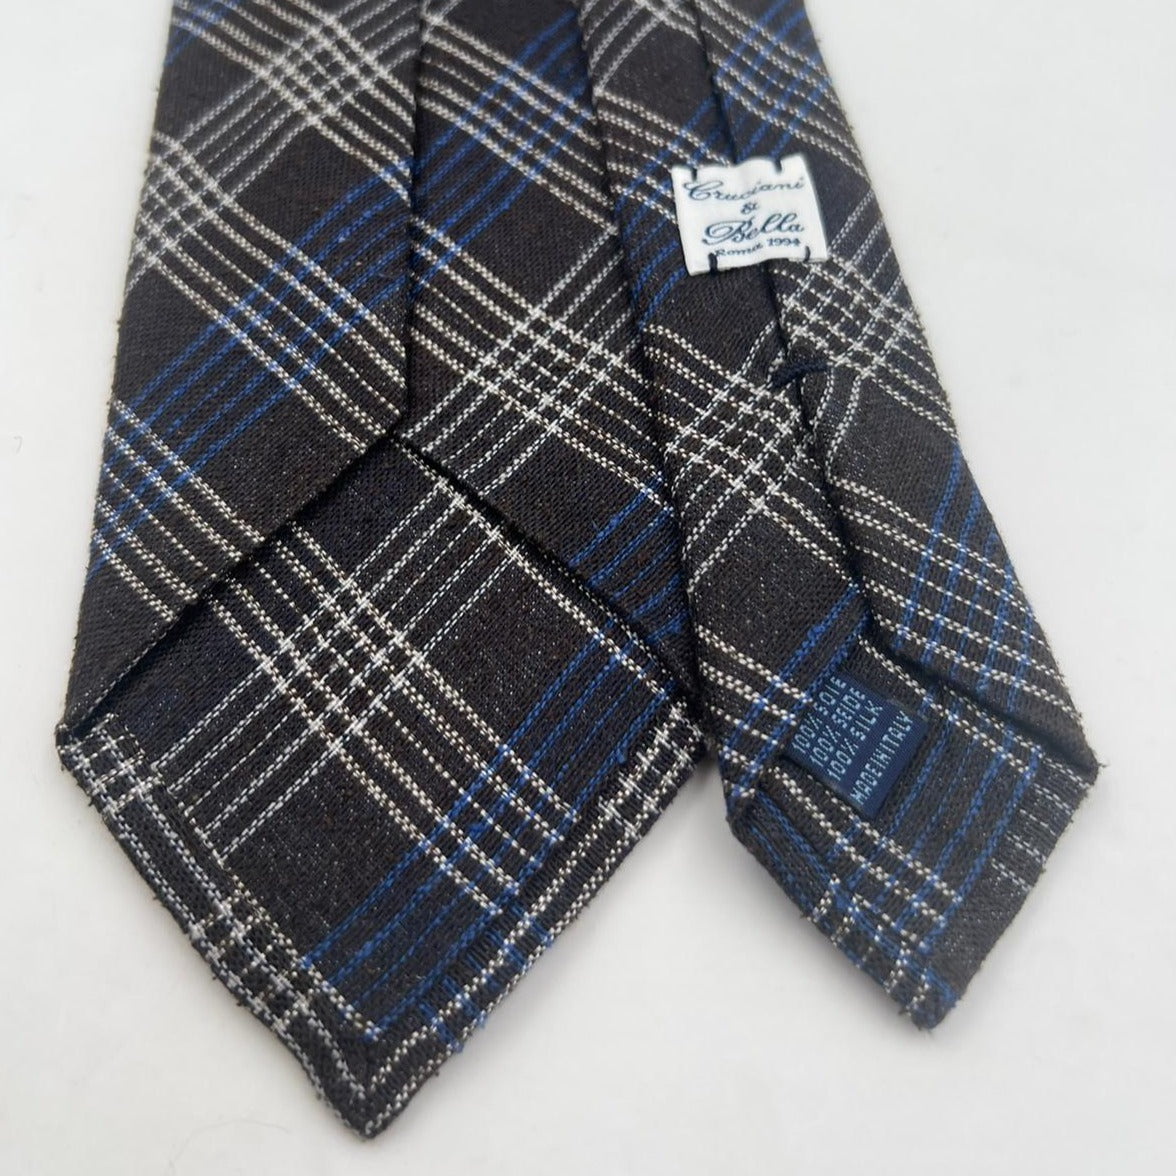 Cruciani & Bella 100% Silk  Self Tipped Brown Tie Blue and White Tartan Motif Handmade in Italy 8,5 cm x 148 cm New Old Stock #6664